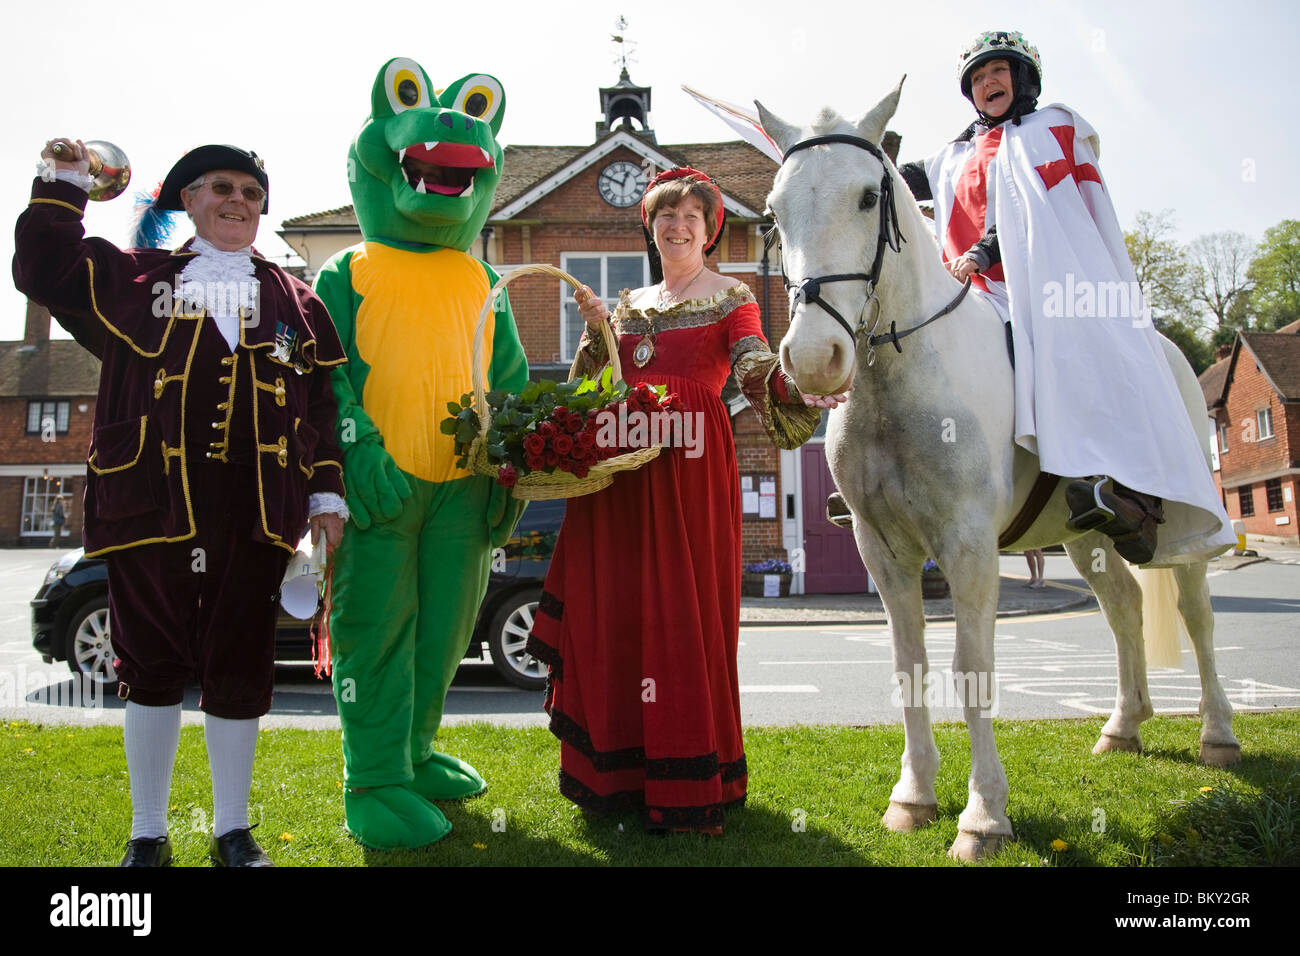 A group of characters assemble outside the Town Hall in the High Street on St George's day, Haslemere, Surrey, England. Stock Photo